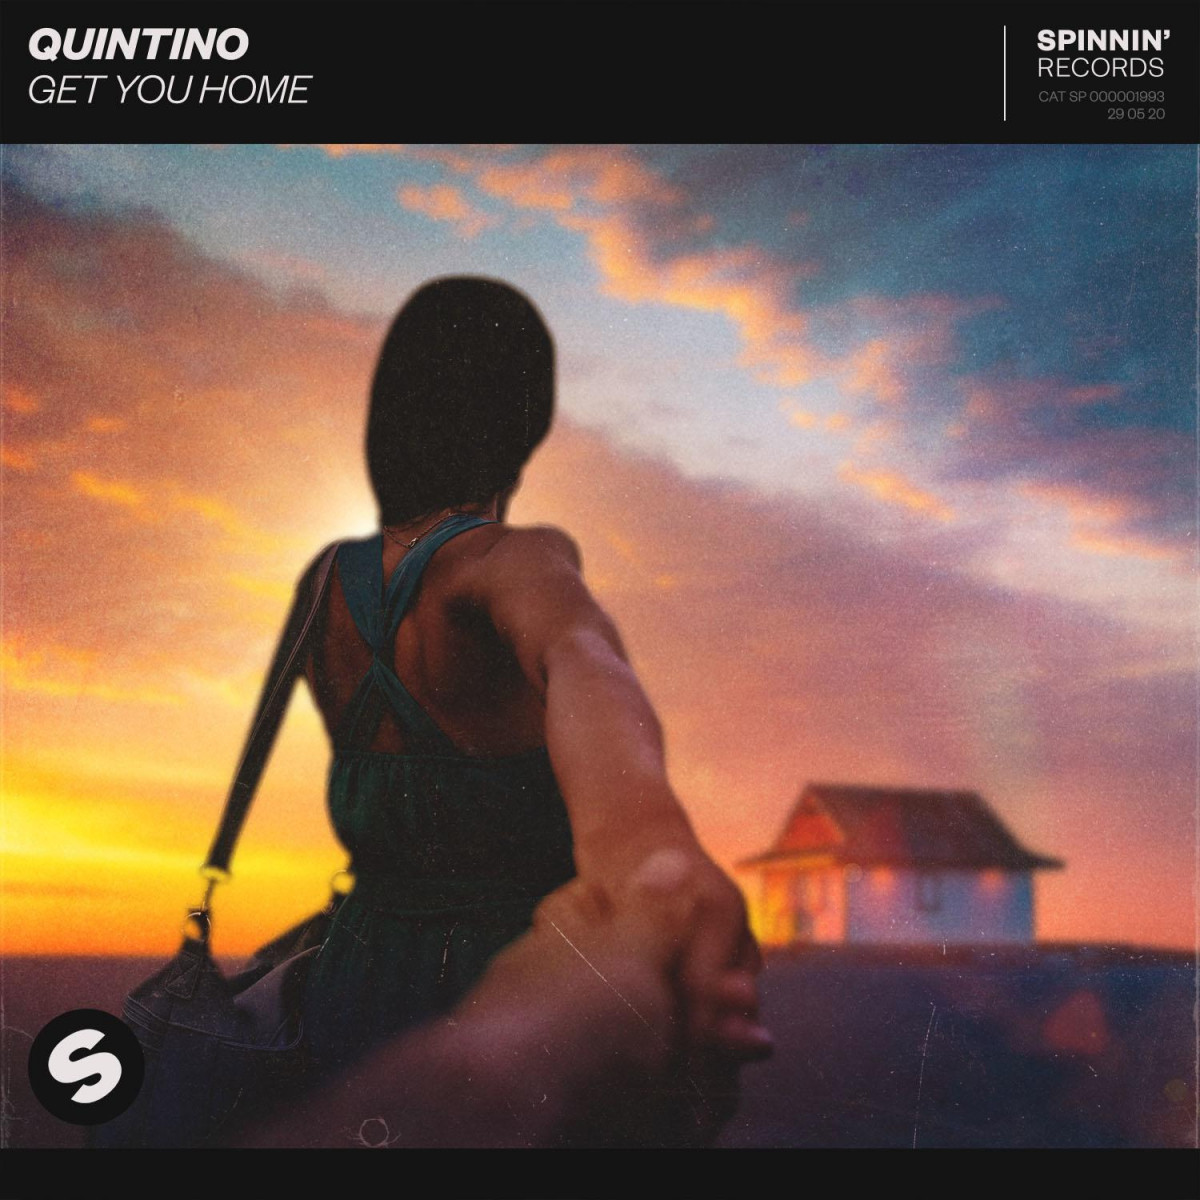 Quintino - Coming Home